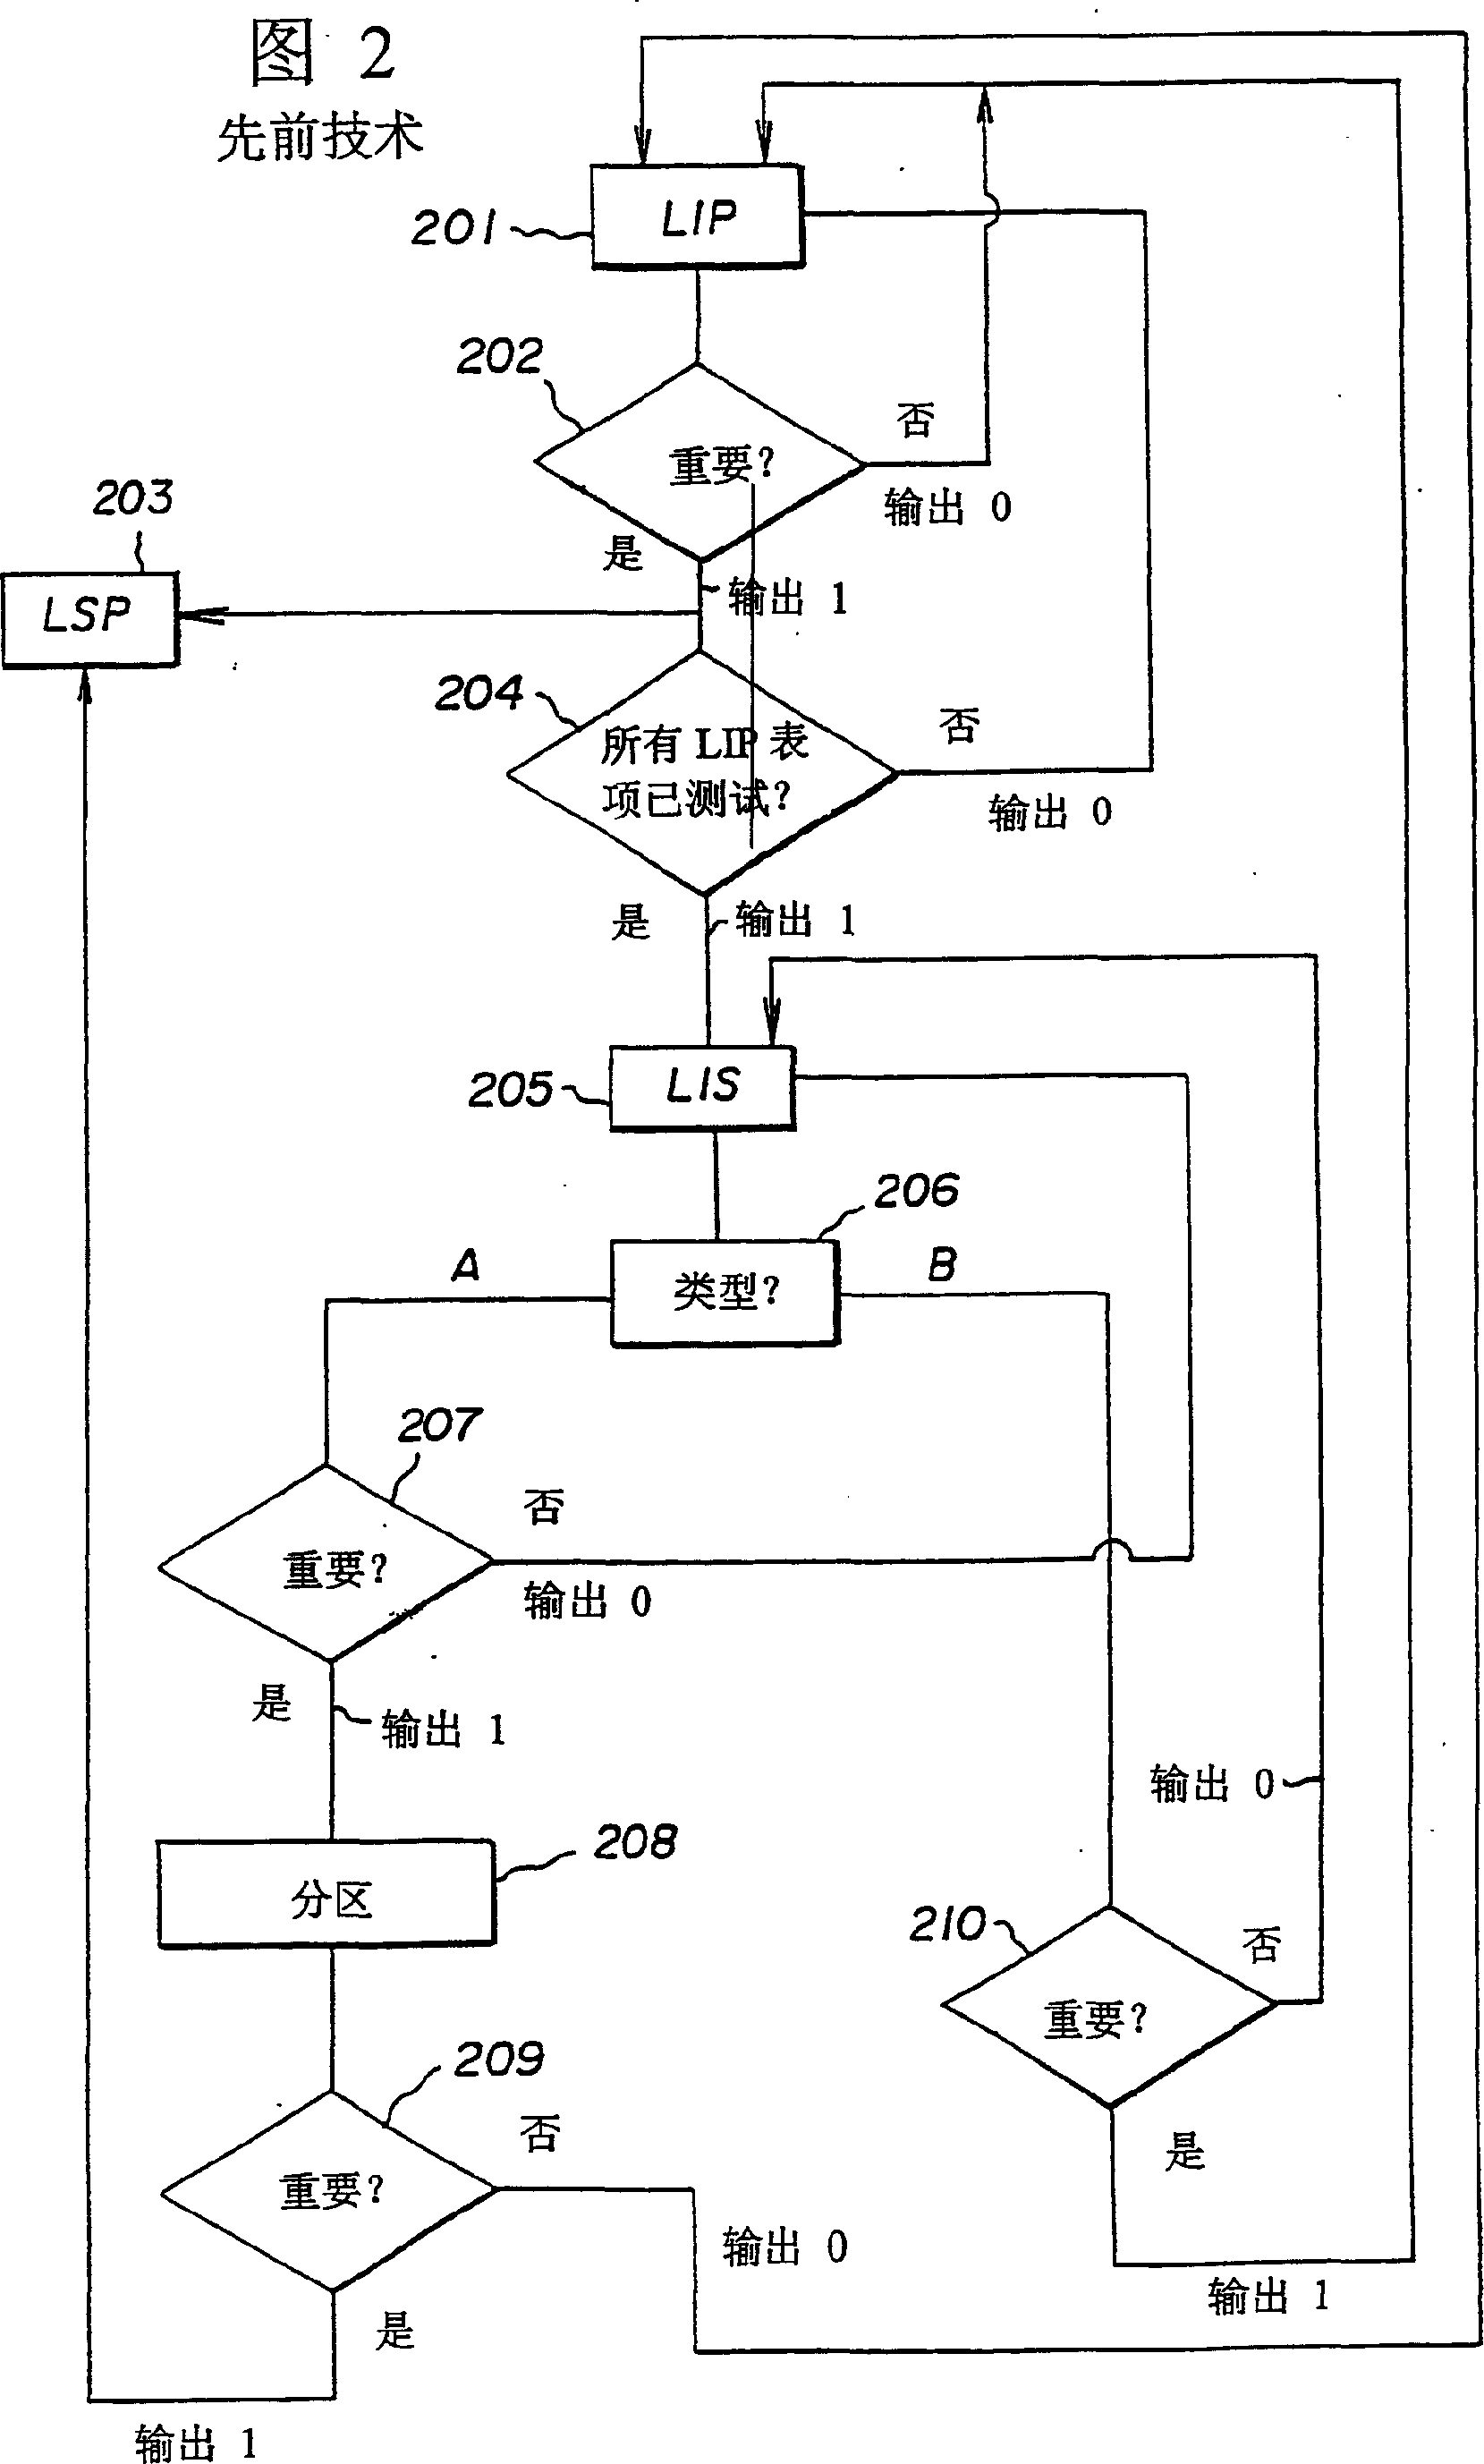 Method and device for coding, decoding and compressing image